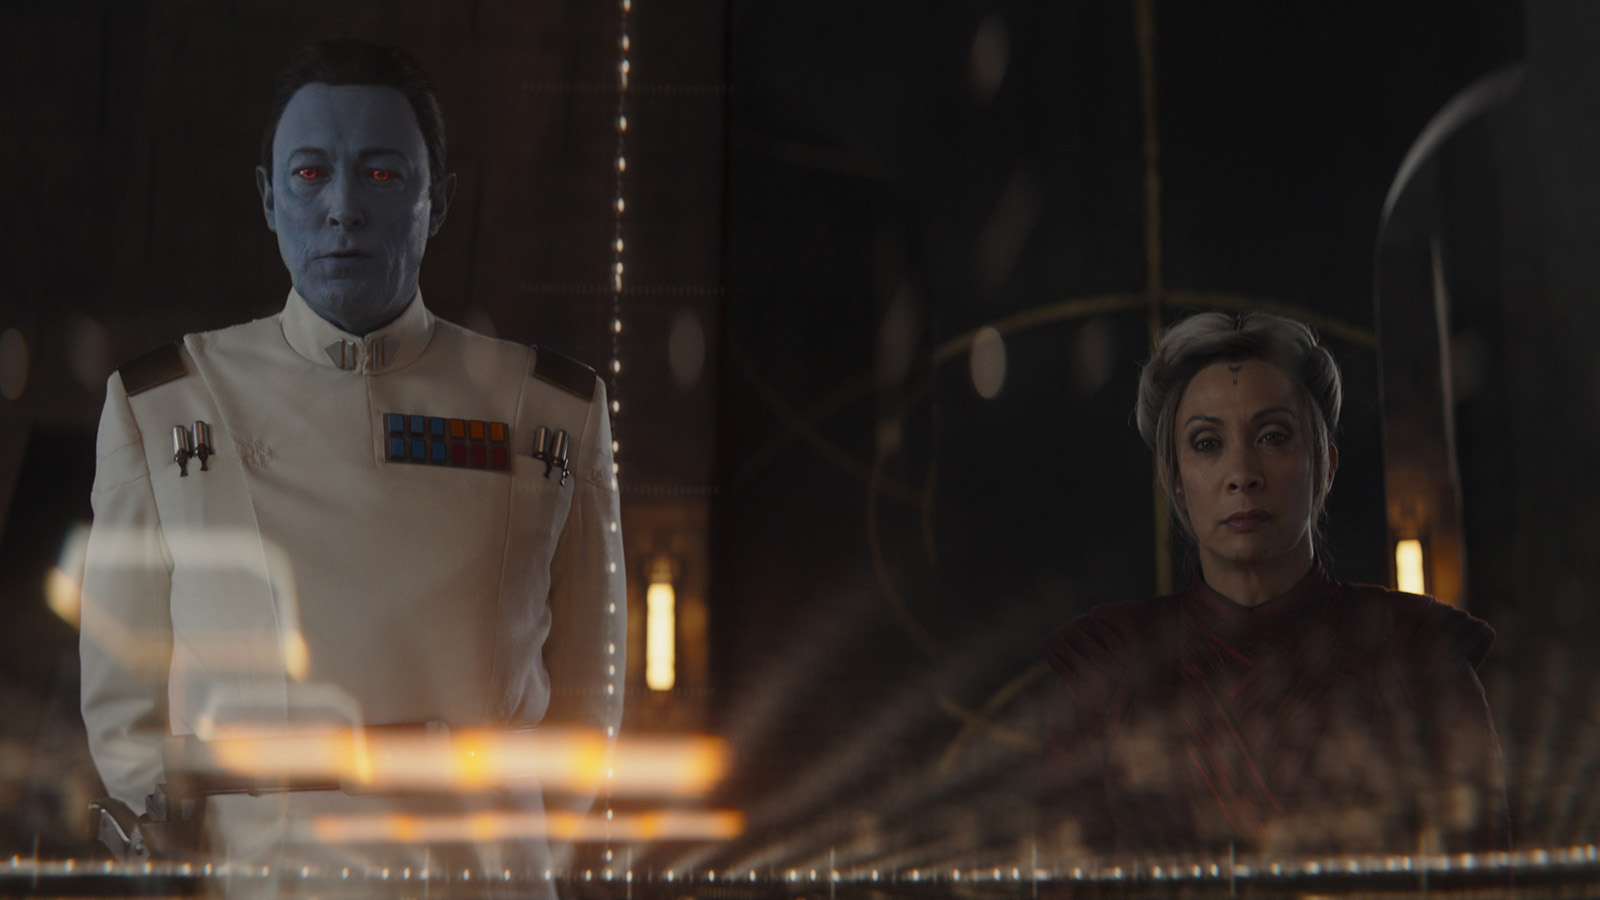 Grand Admiral Thrawn and his devotee, Morgan Elsbeth, have dark plans for the galaxy.